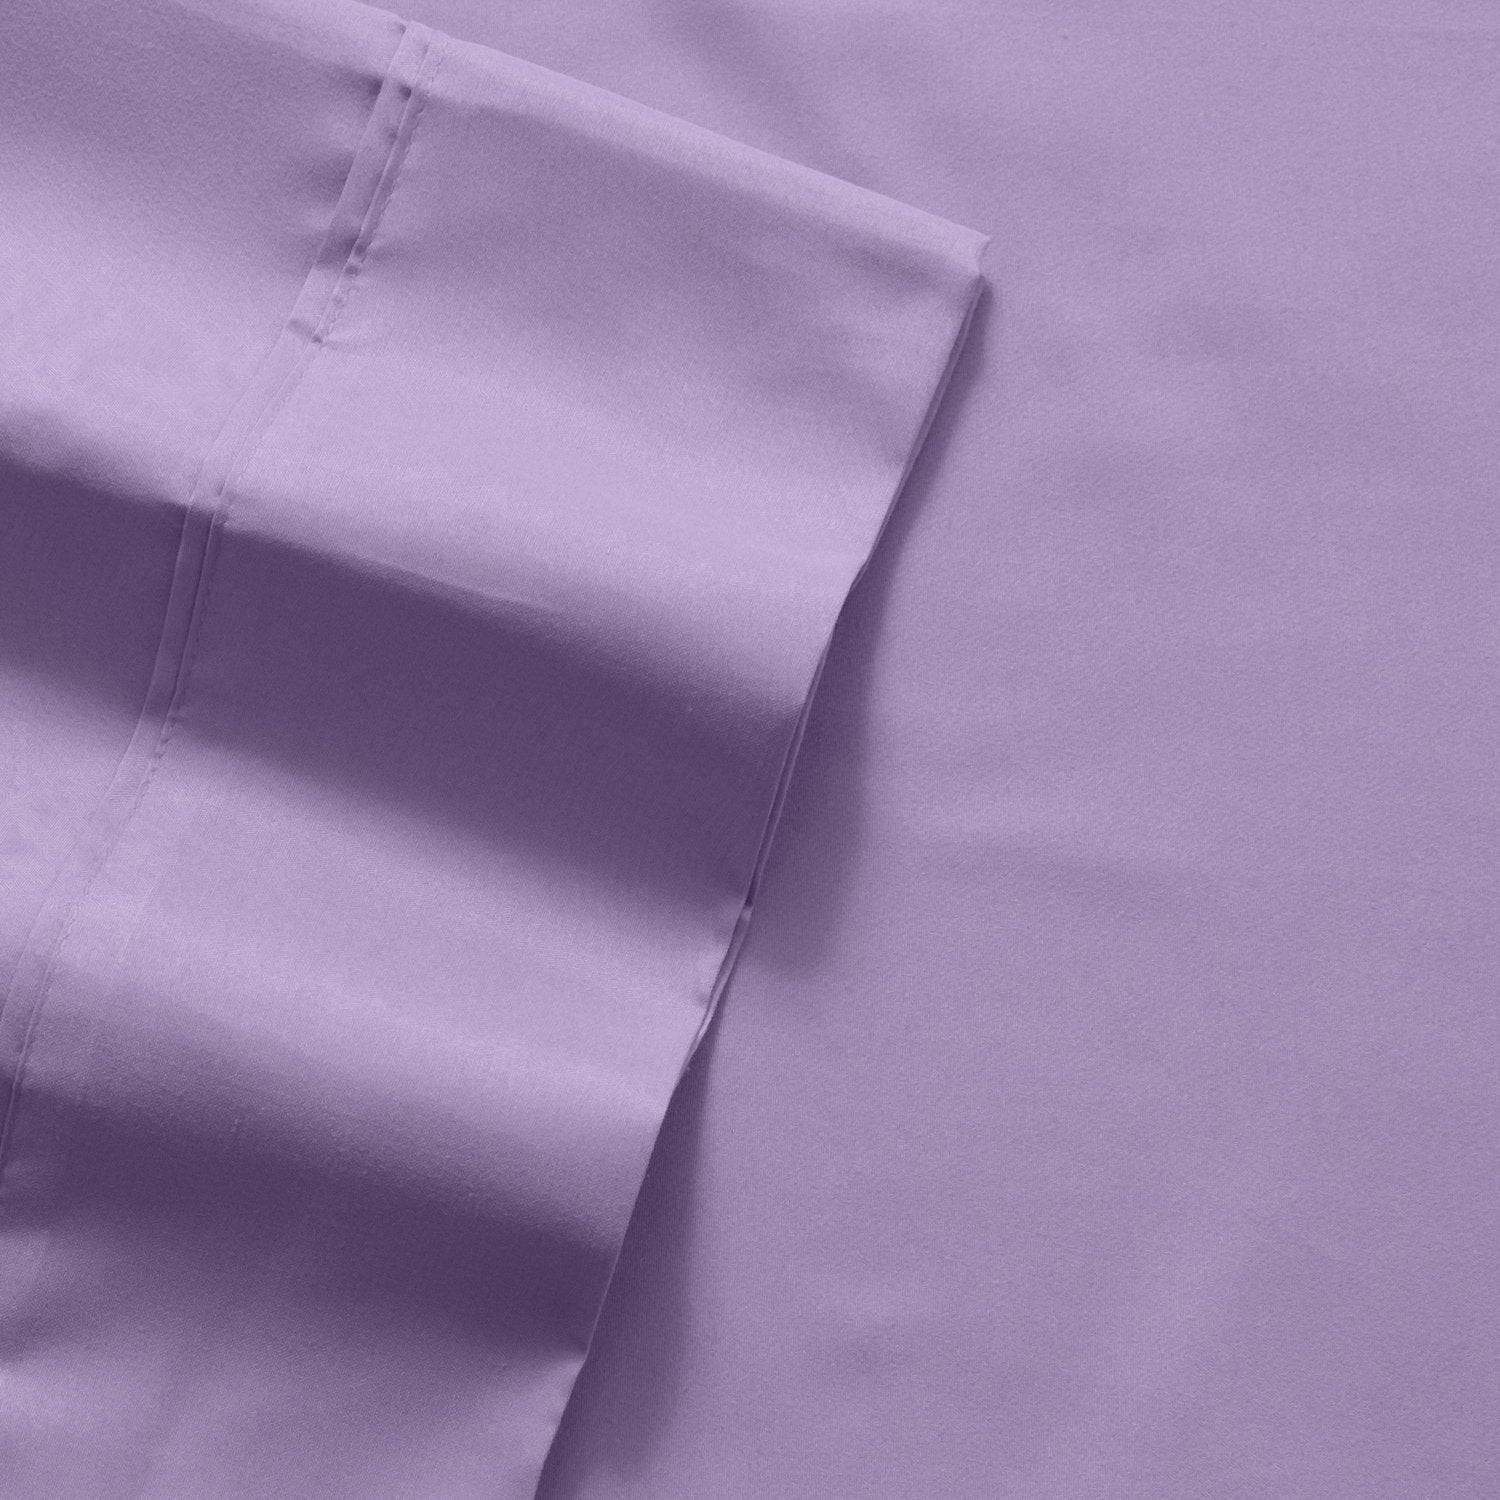 Deluxe 6-Piece Bed Sheet Set (Lavender) - Fabric